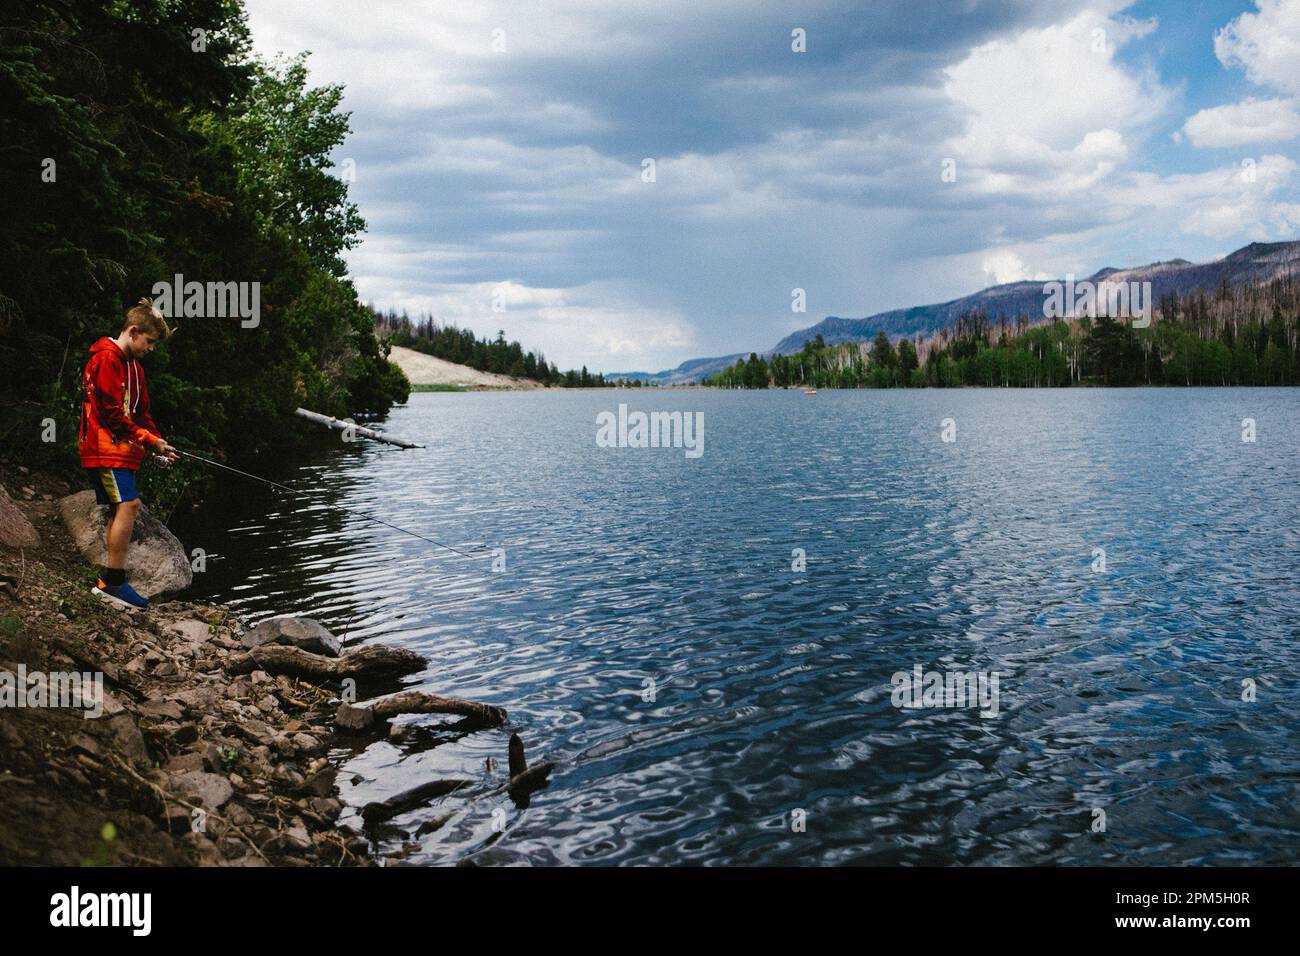 Boy fishing on lake with forest, mountains in outdoor adventure Stock Photo